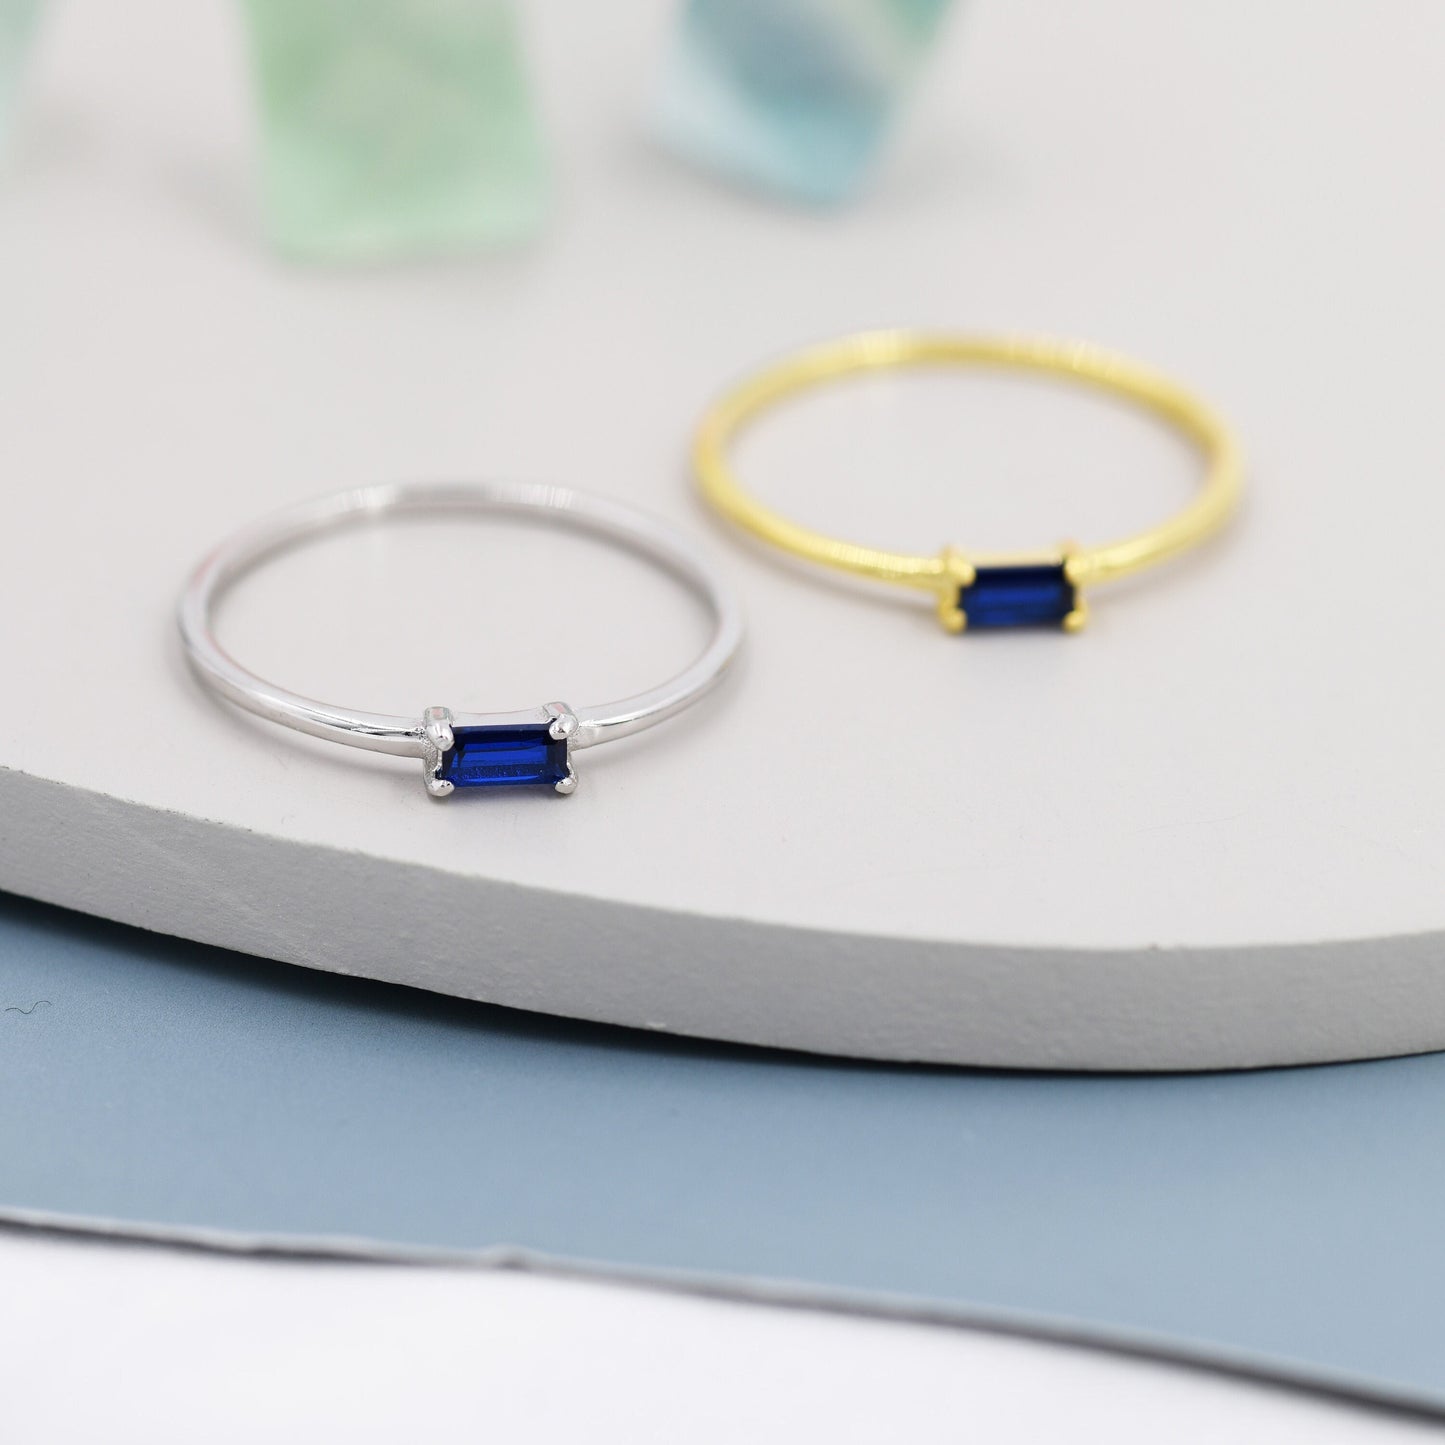 Sapphire Blue Baguette CZ Ring in Sterling Silver, Silver or Gold, Minimalist Single Baguette CZ Ring US 5 - 8